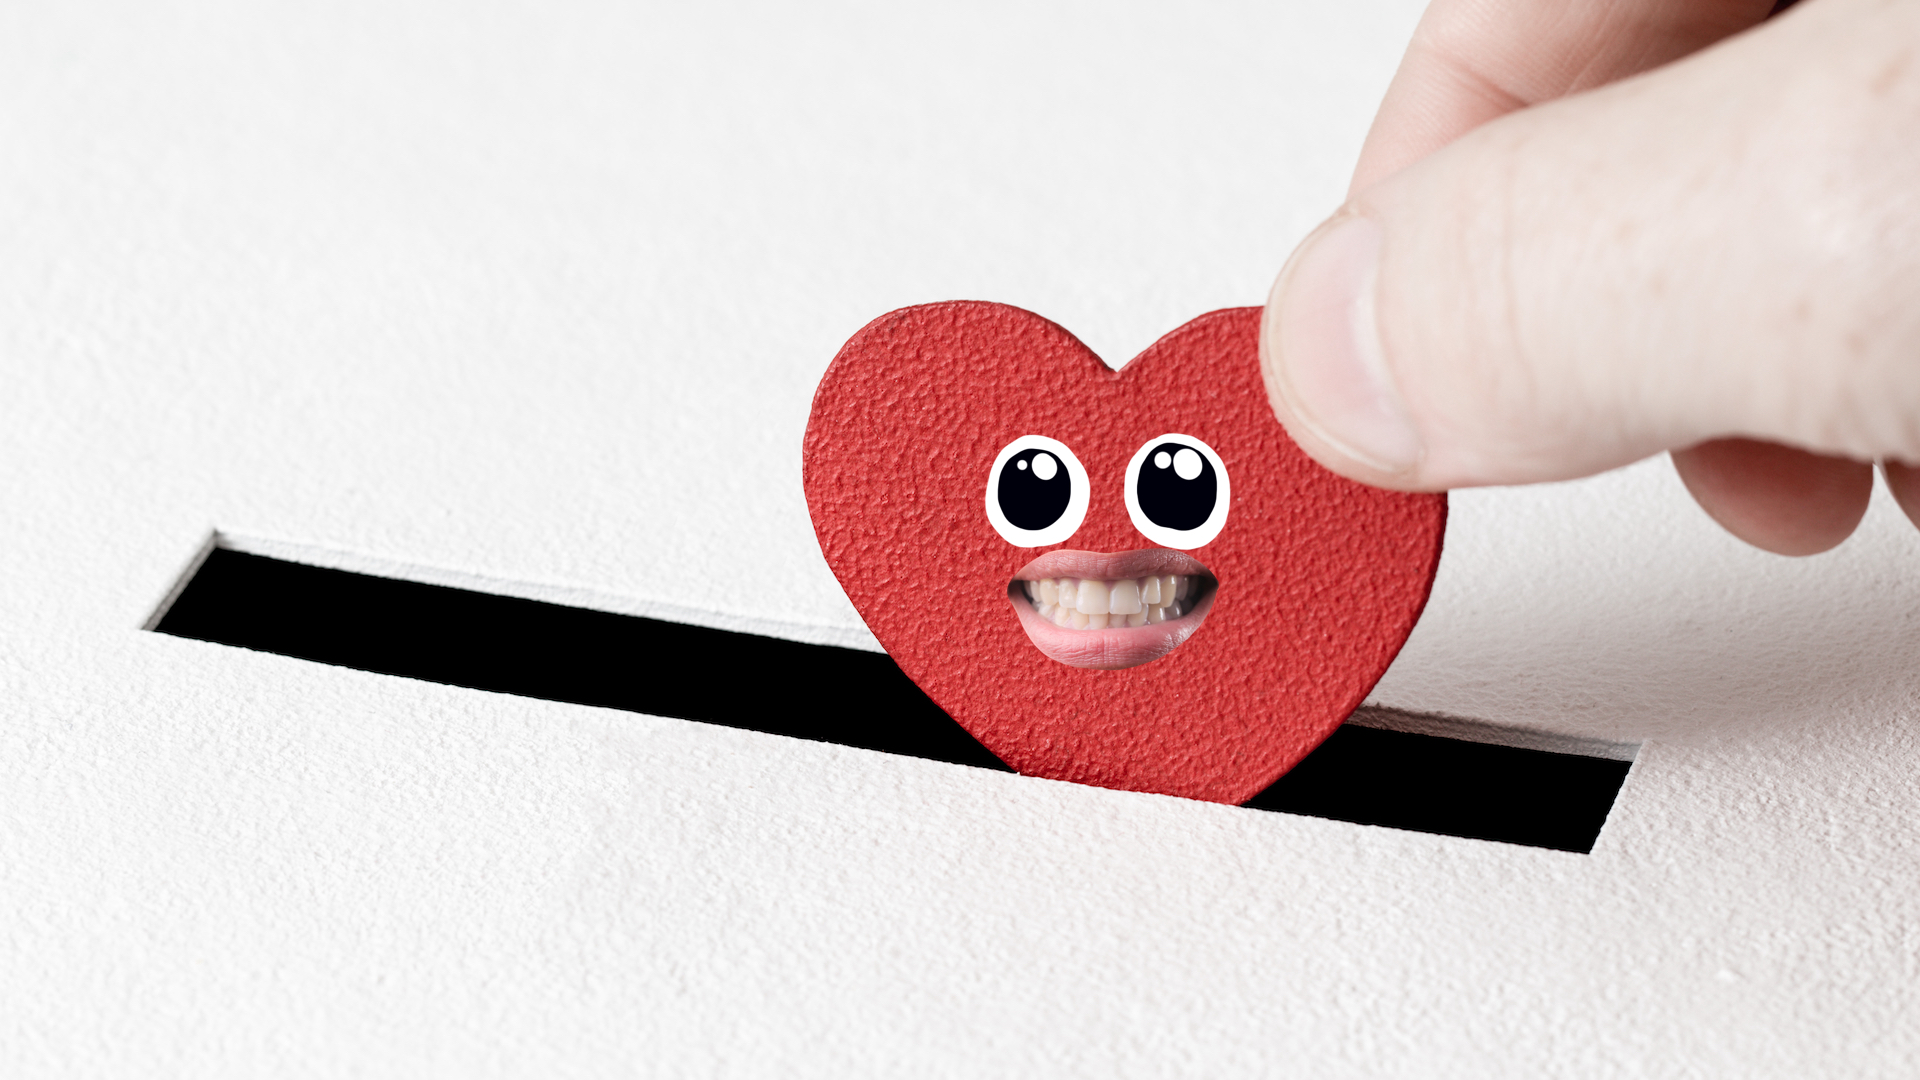 A heart shaped piece of card being dropped into a piggy bank slot